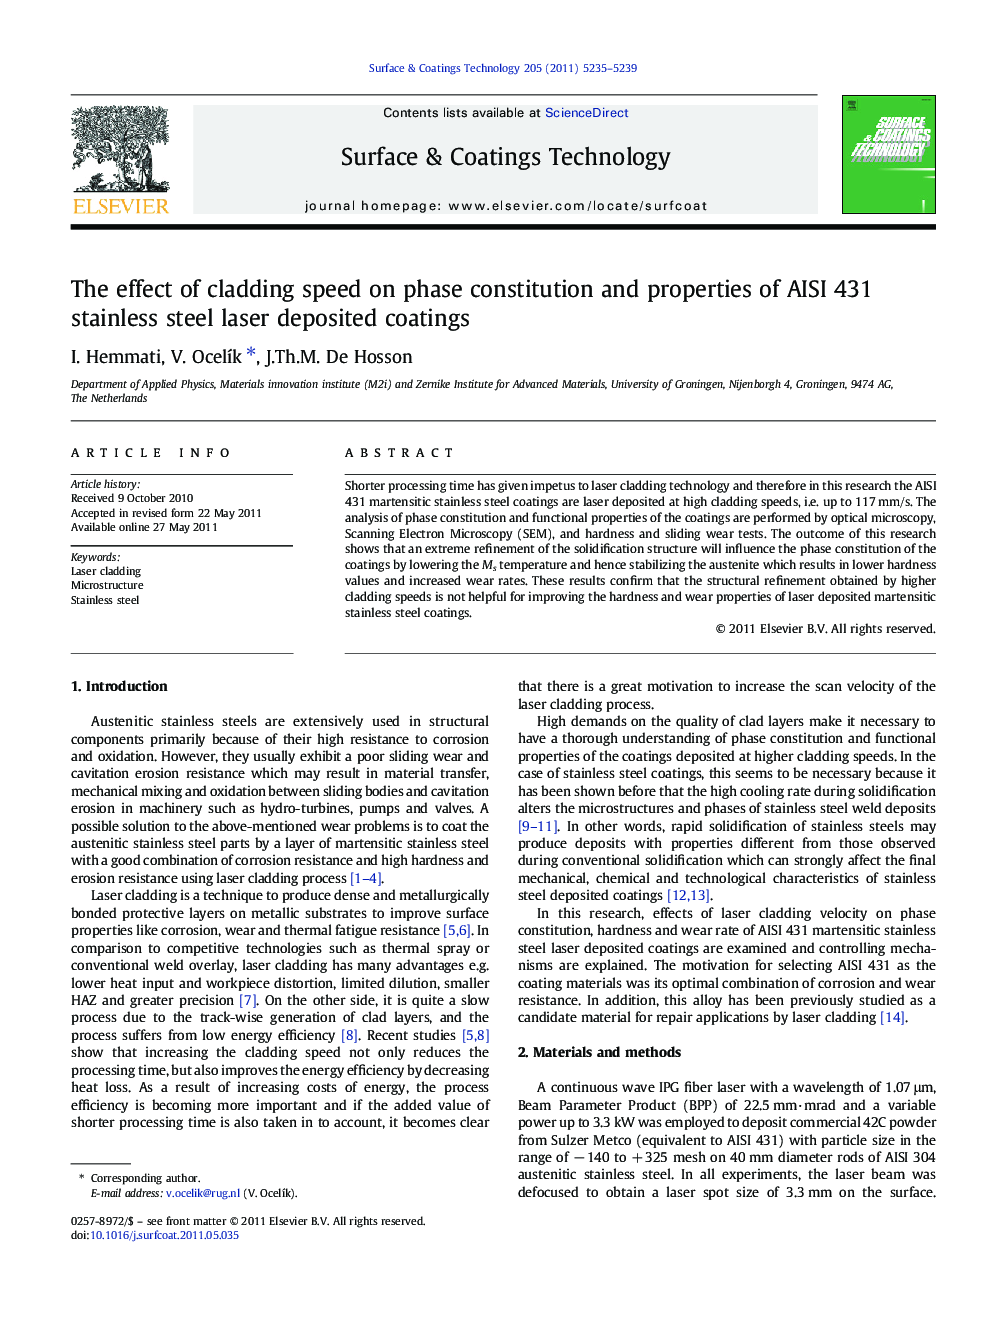 The effect of cladding speed on phase constitution and properties of AISI 431 stainless steel laser deposited coatings